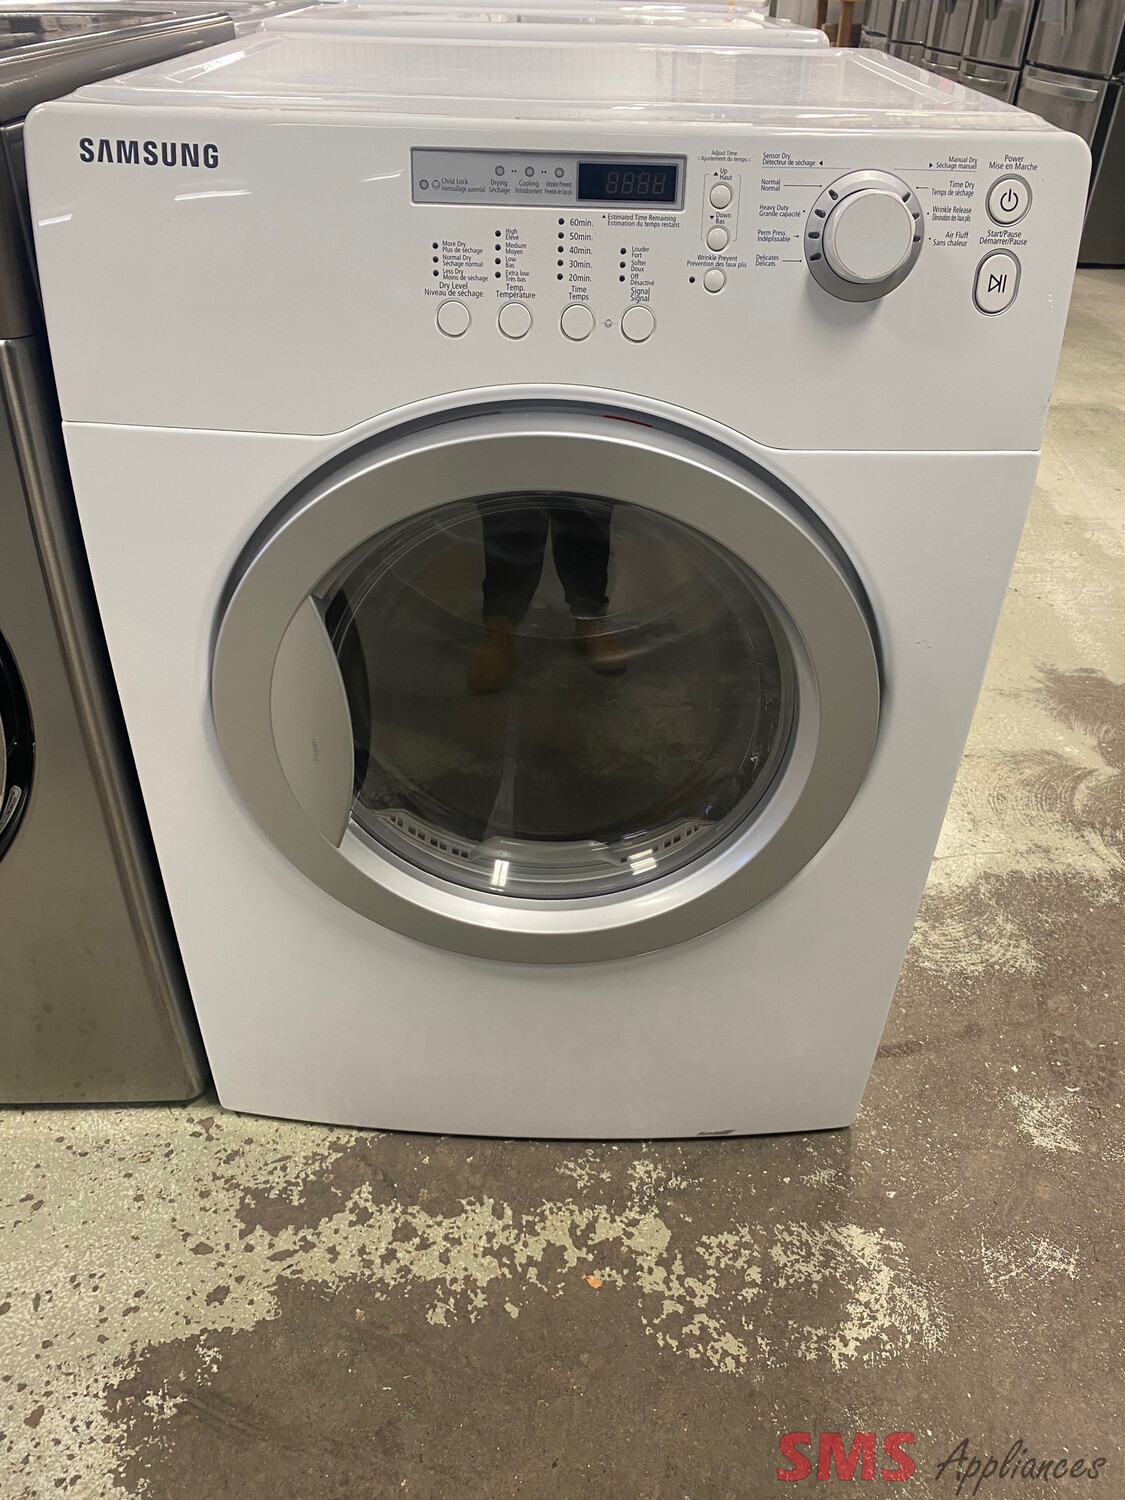 Samsung 27" Front Load Electric Dryer 7.3 Cu. Ft. DV203AEW